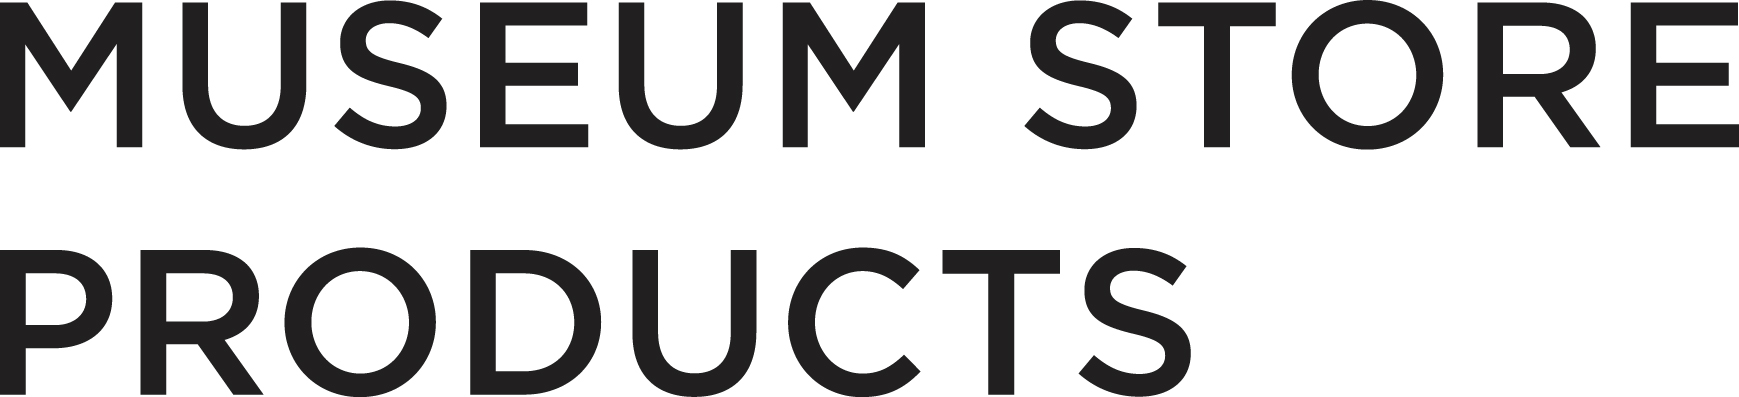 Museum Store Products Inc. logo